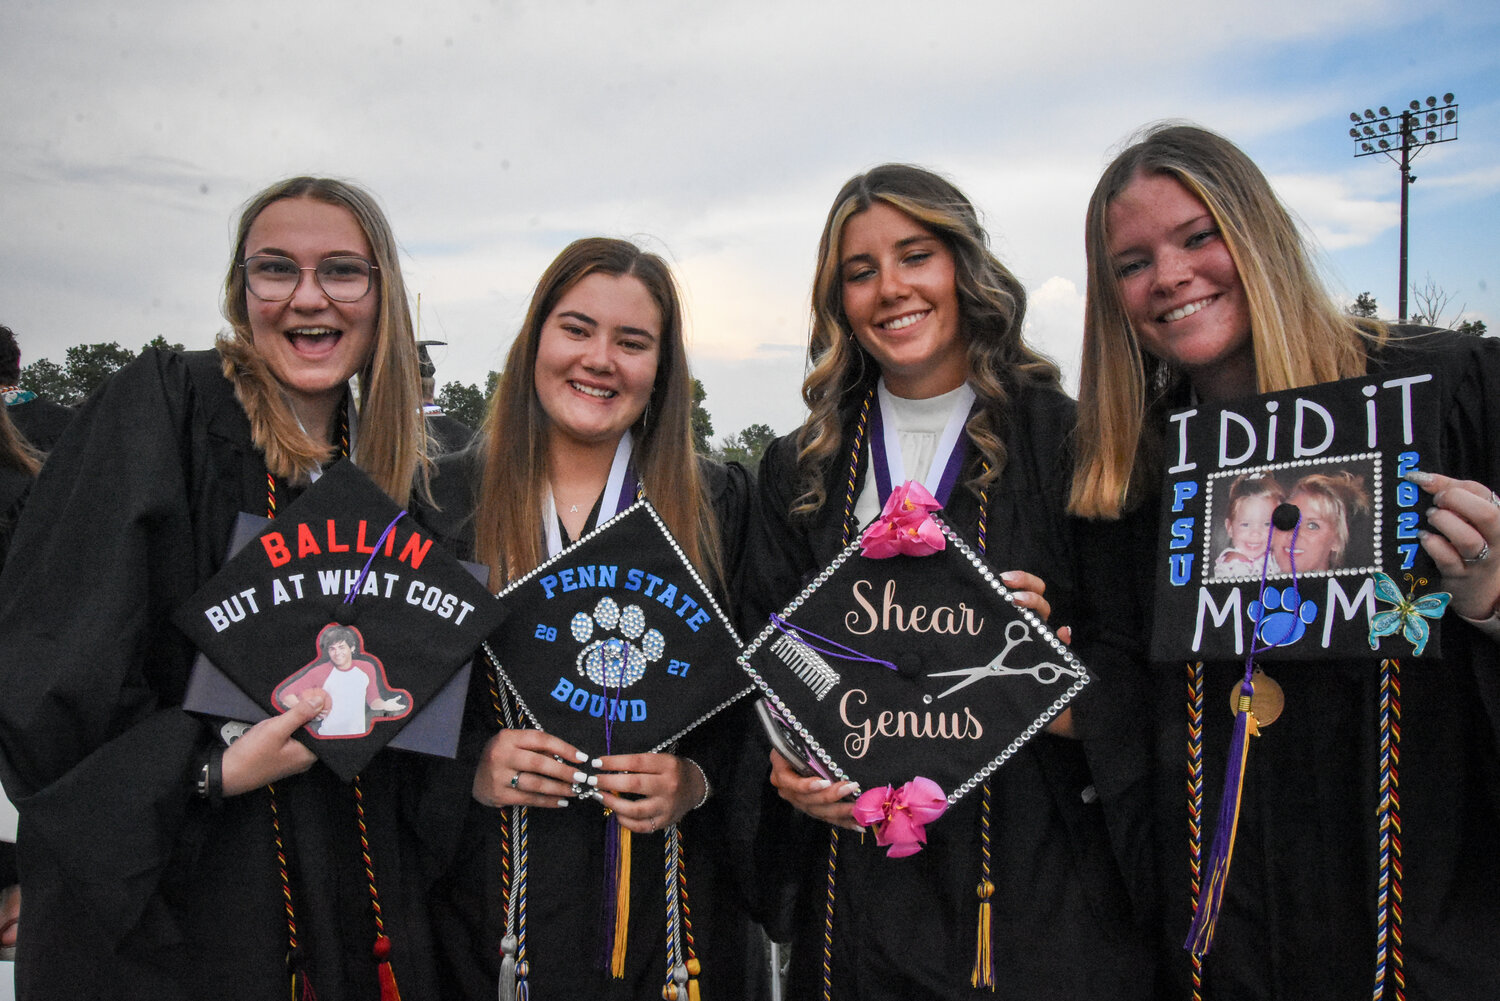 Palisades seniors show off their caps, which provide clues as to what’s next as they leave high school behind.